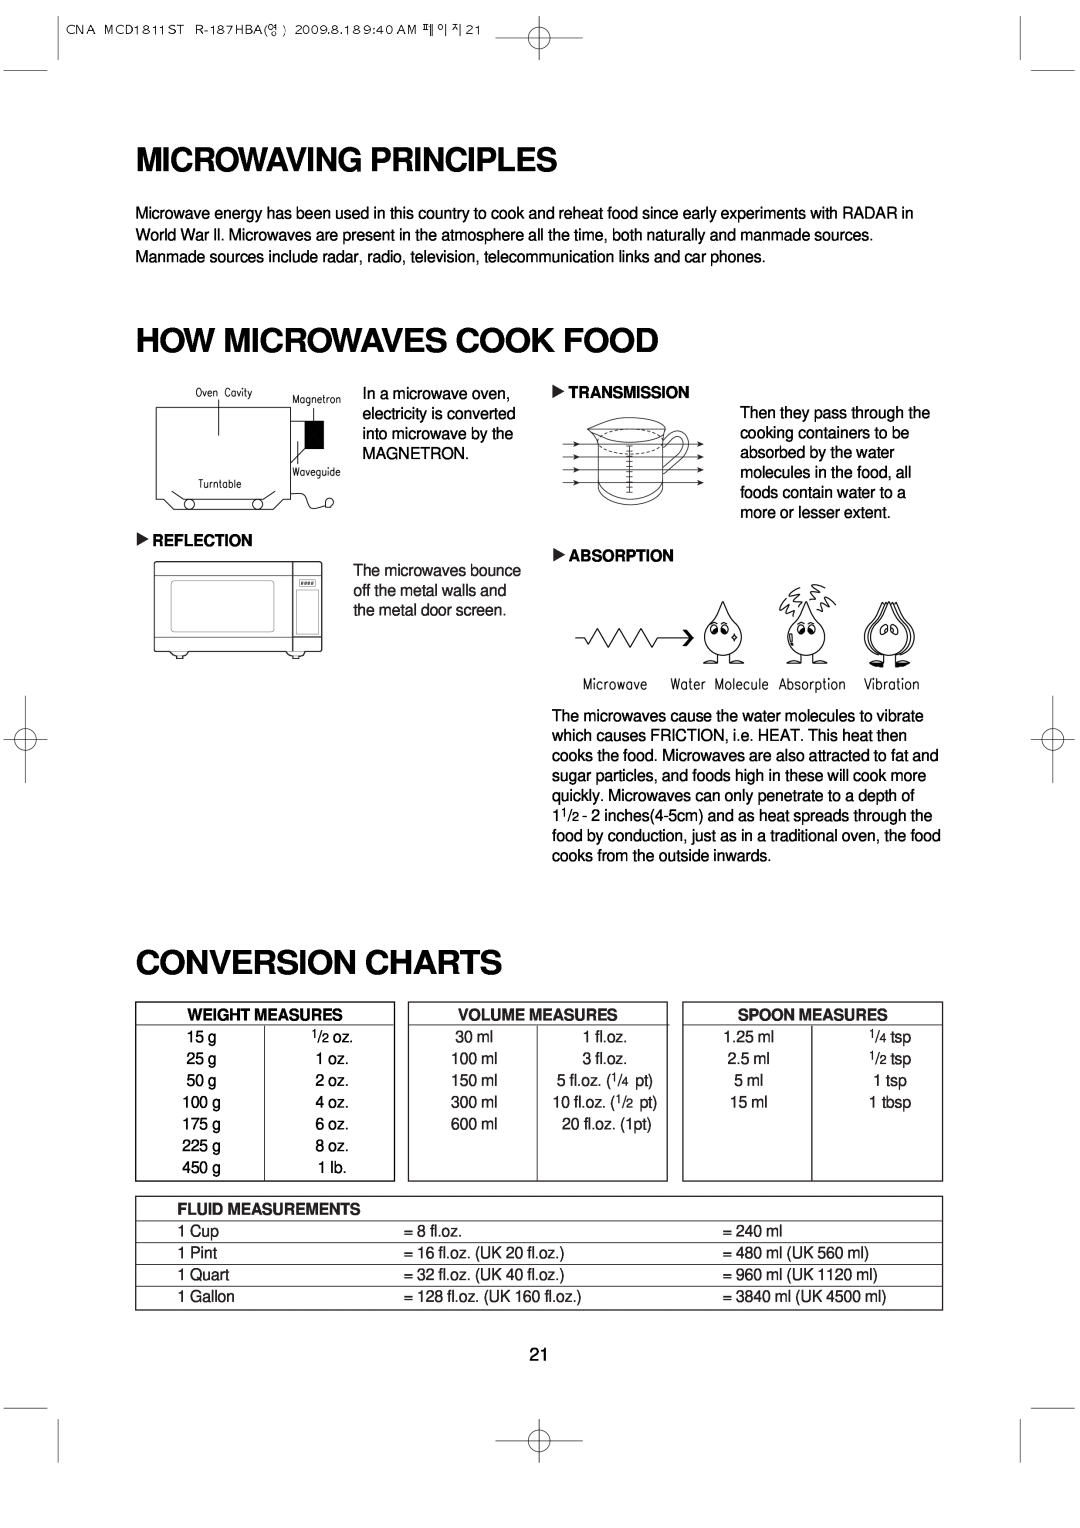 Magic Chef MCD1811ST Microwaving Principles, How Microwaves Cook Food, Conversion Charts, Reflection, Transmission 